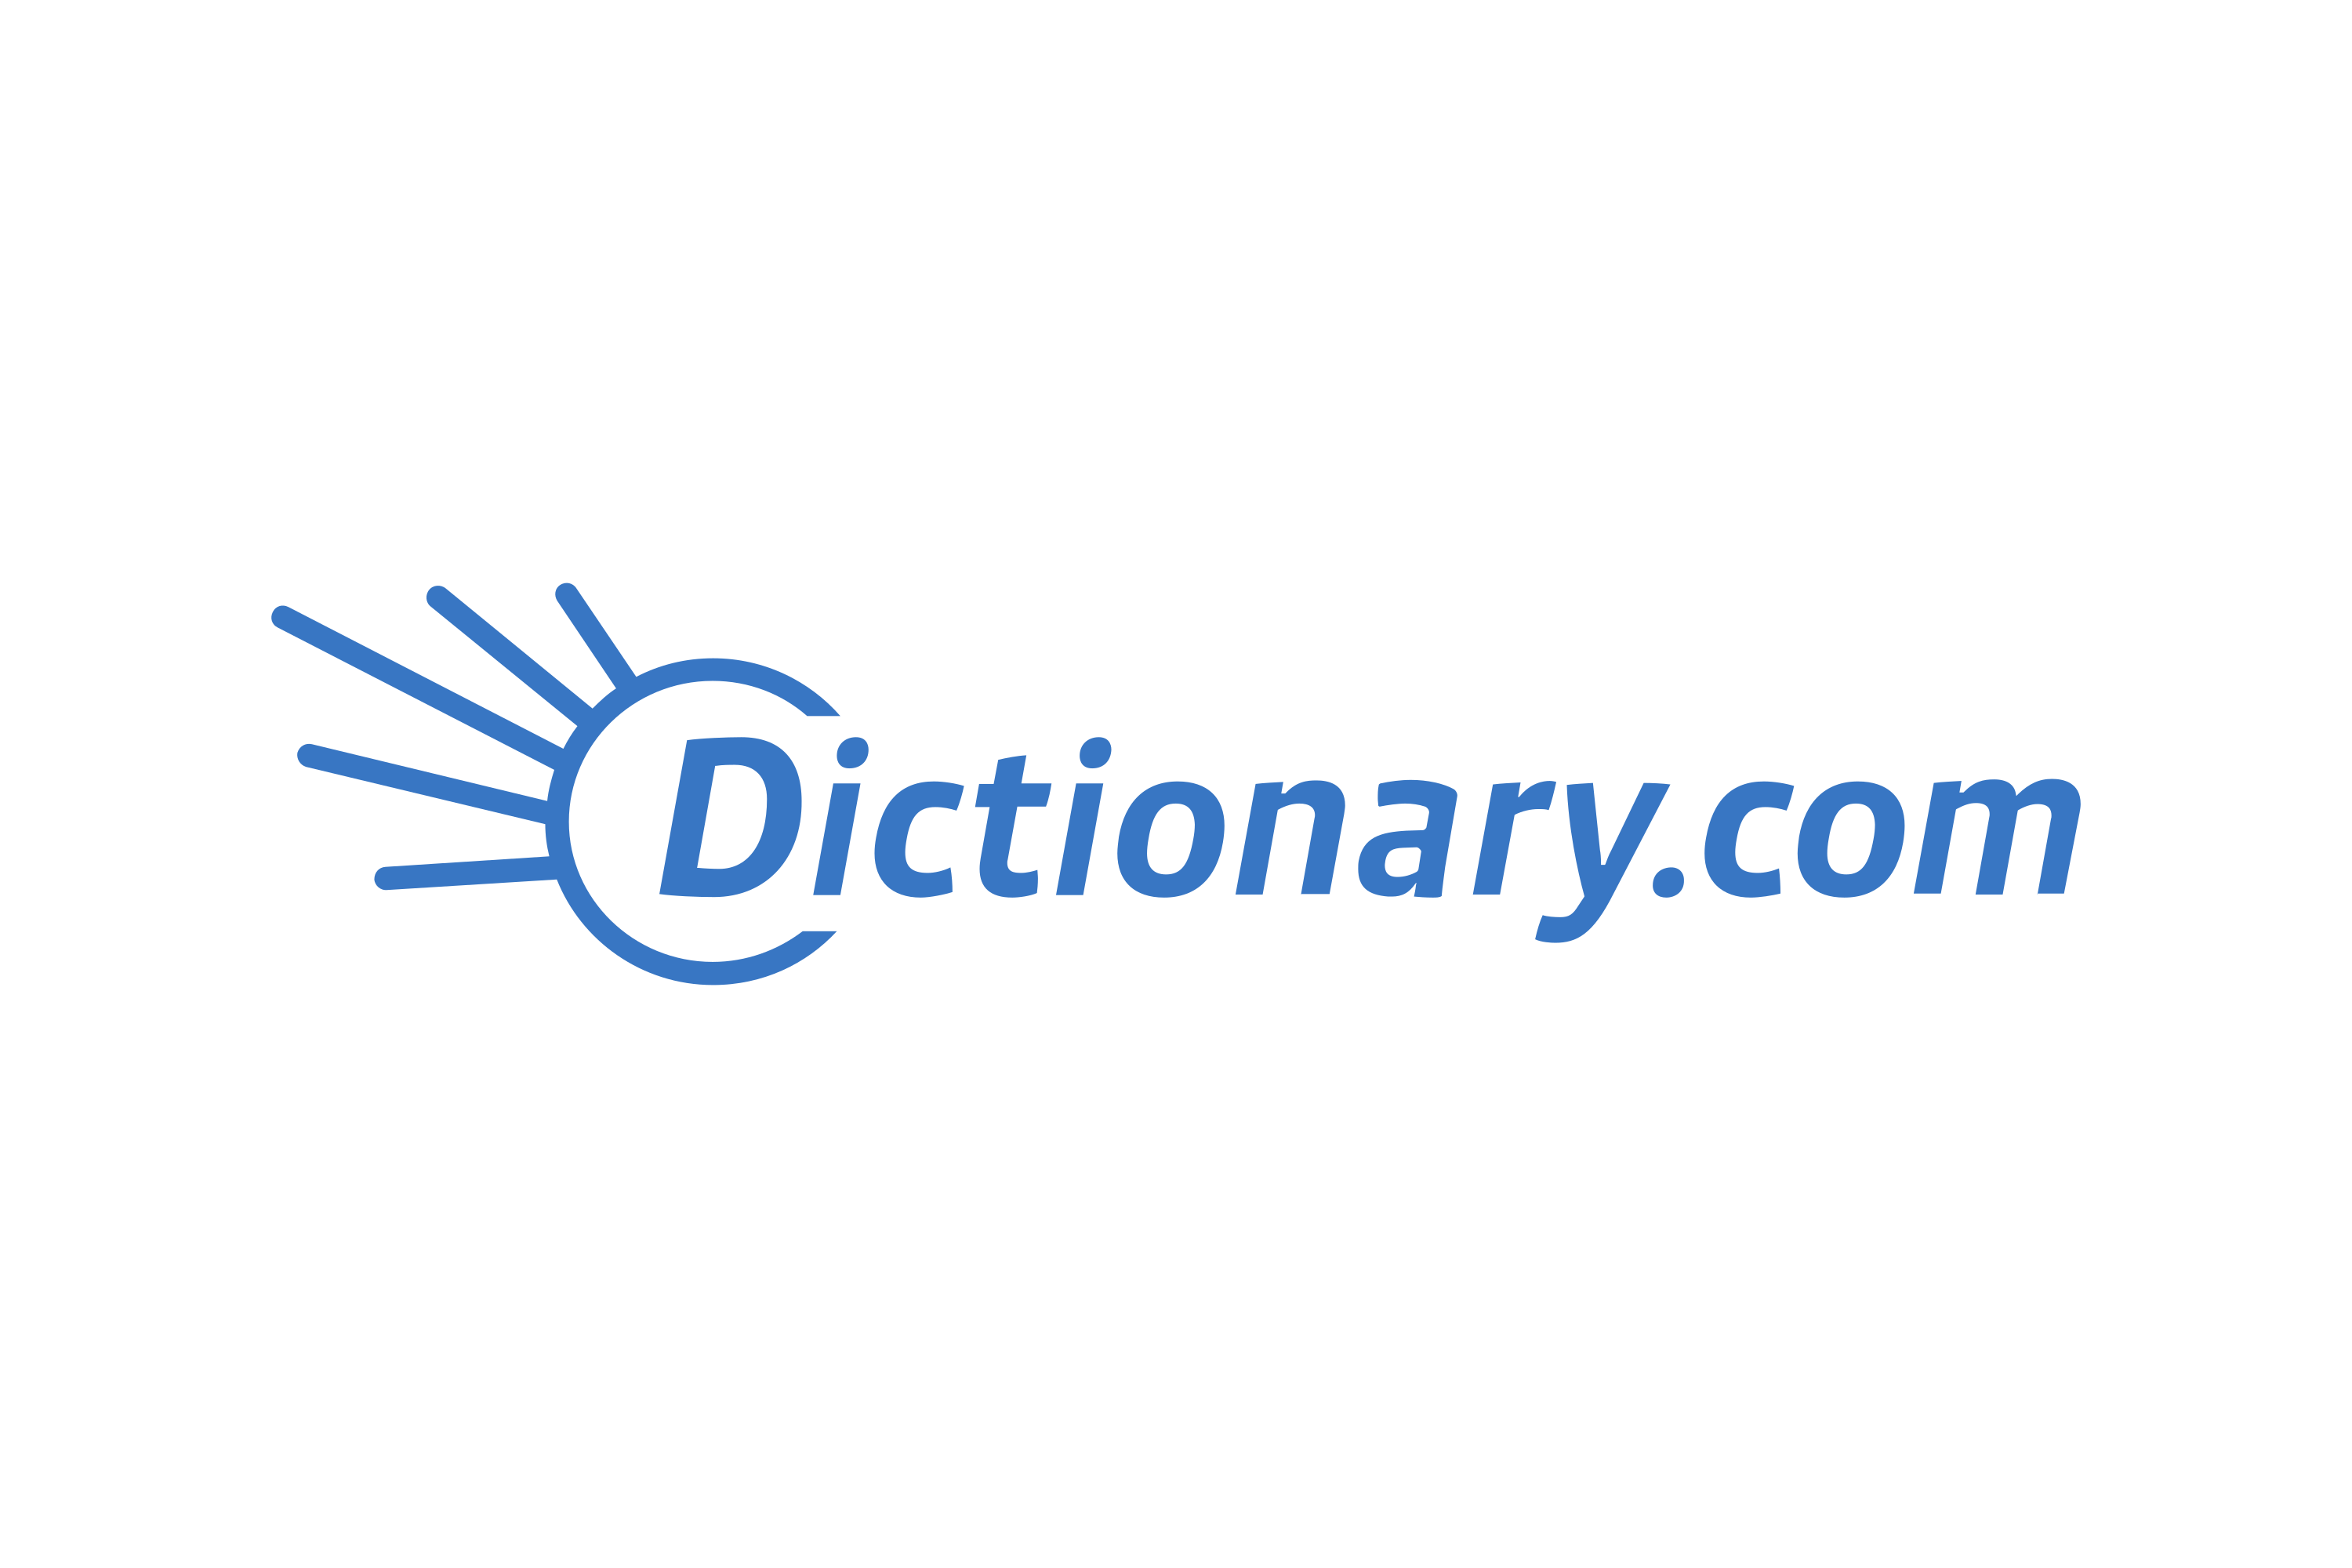 File:Ding- Dictionary Lookup.png - Wikimedia Commons